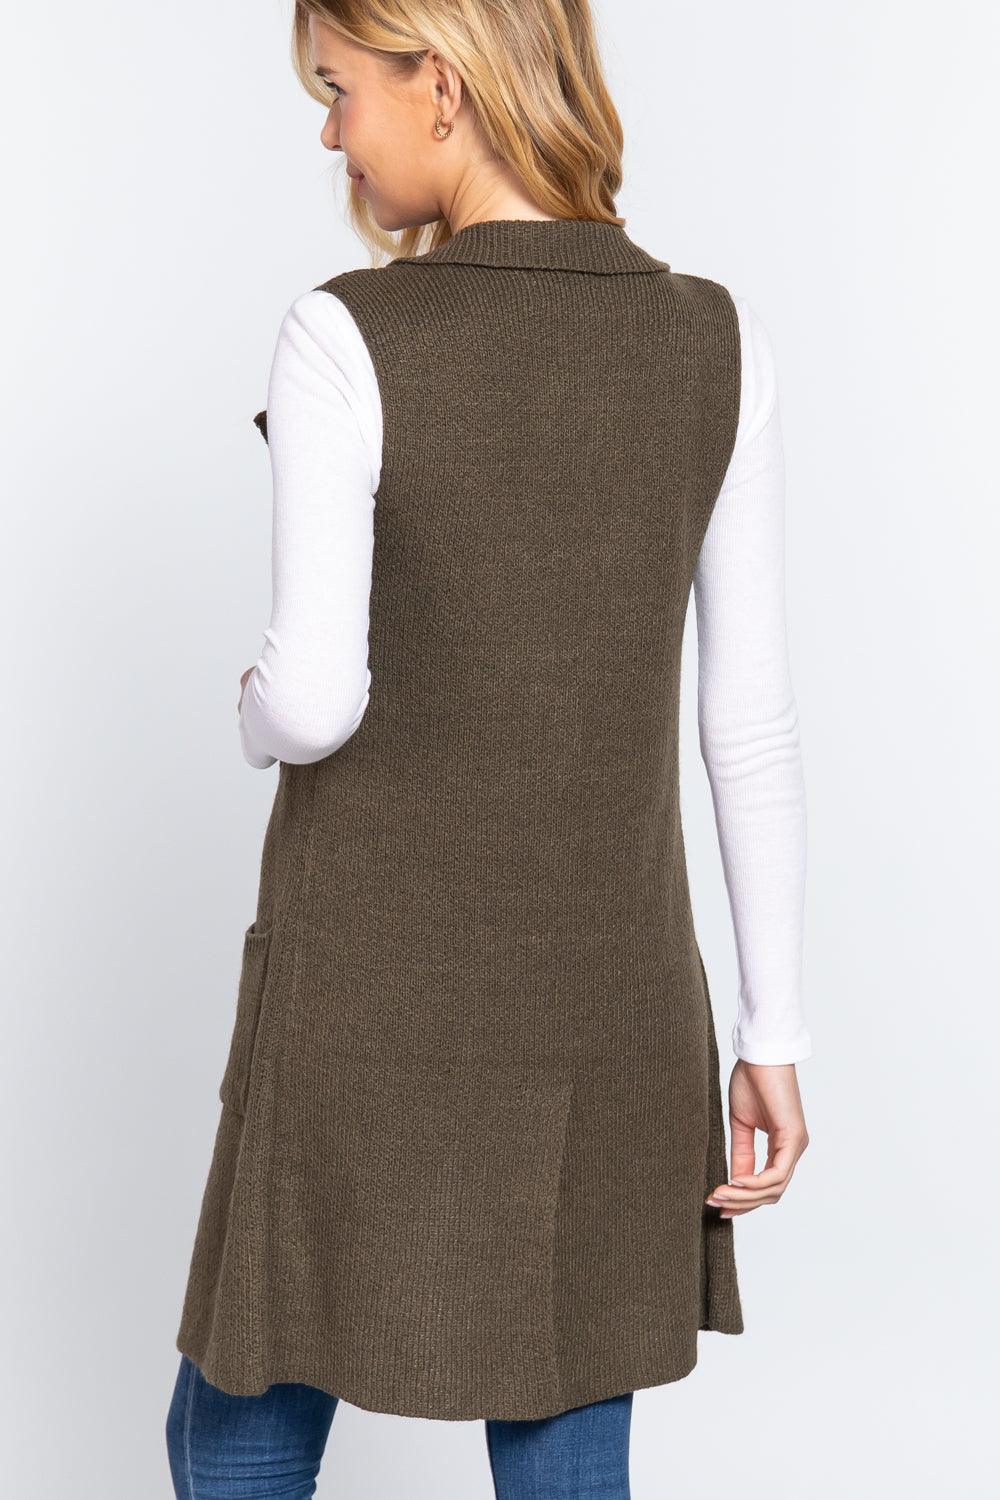 Buying Guide: Stylish and Healthy Dresses 2023 | Fashionably Fit | Sleeveless Long Sweater Vest